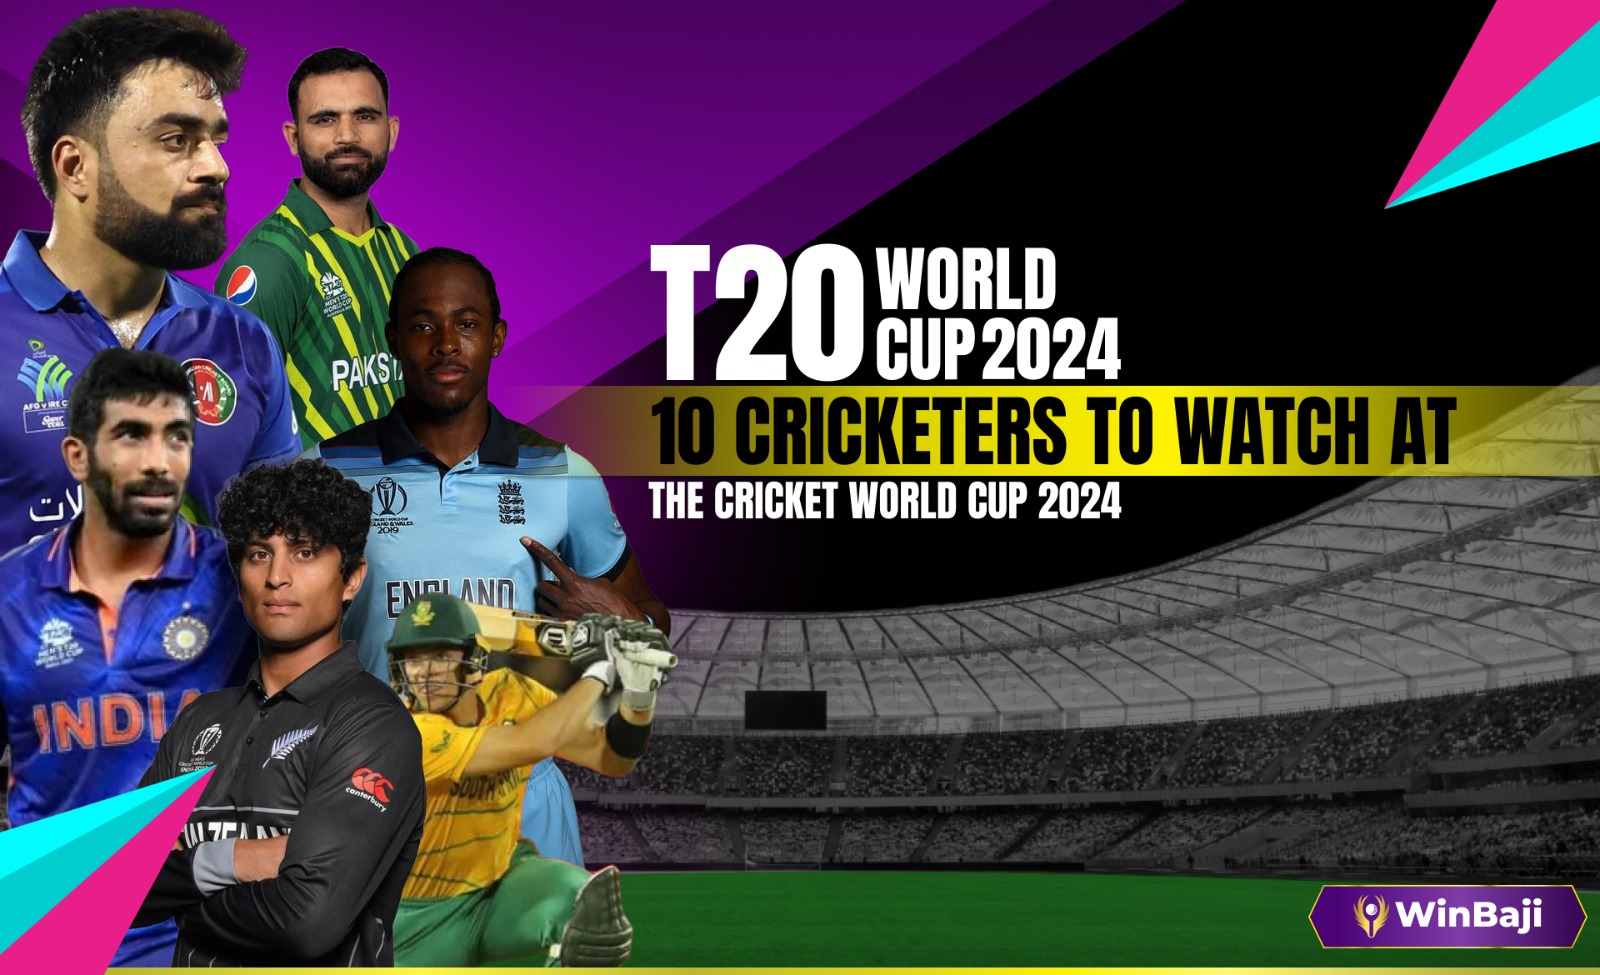 10 Cricketers to Watch at the Cricket World Cup 2024